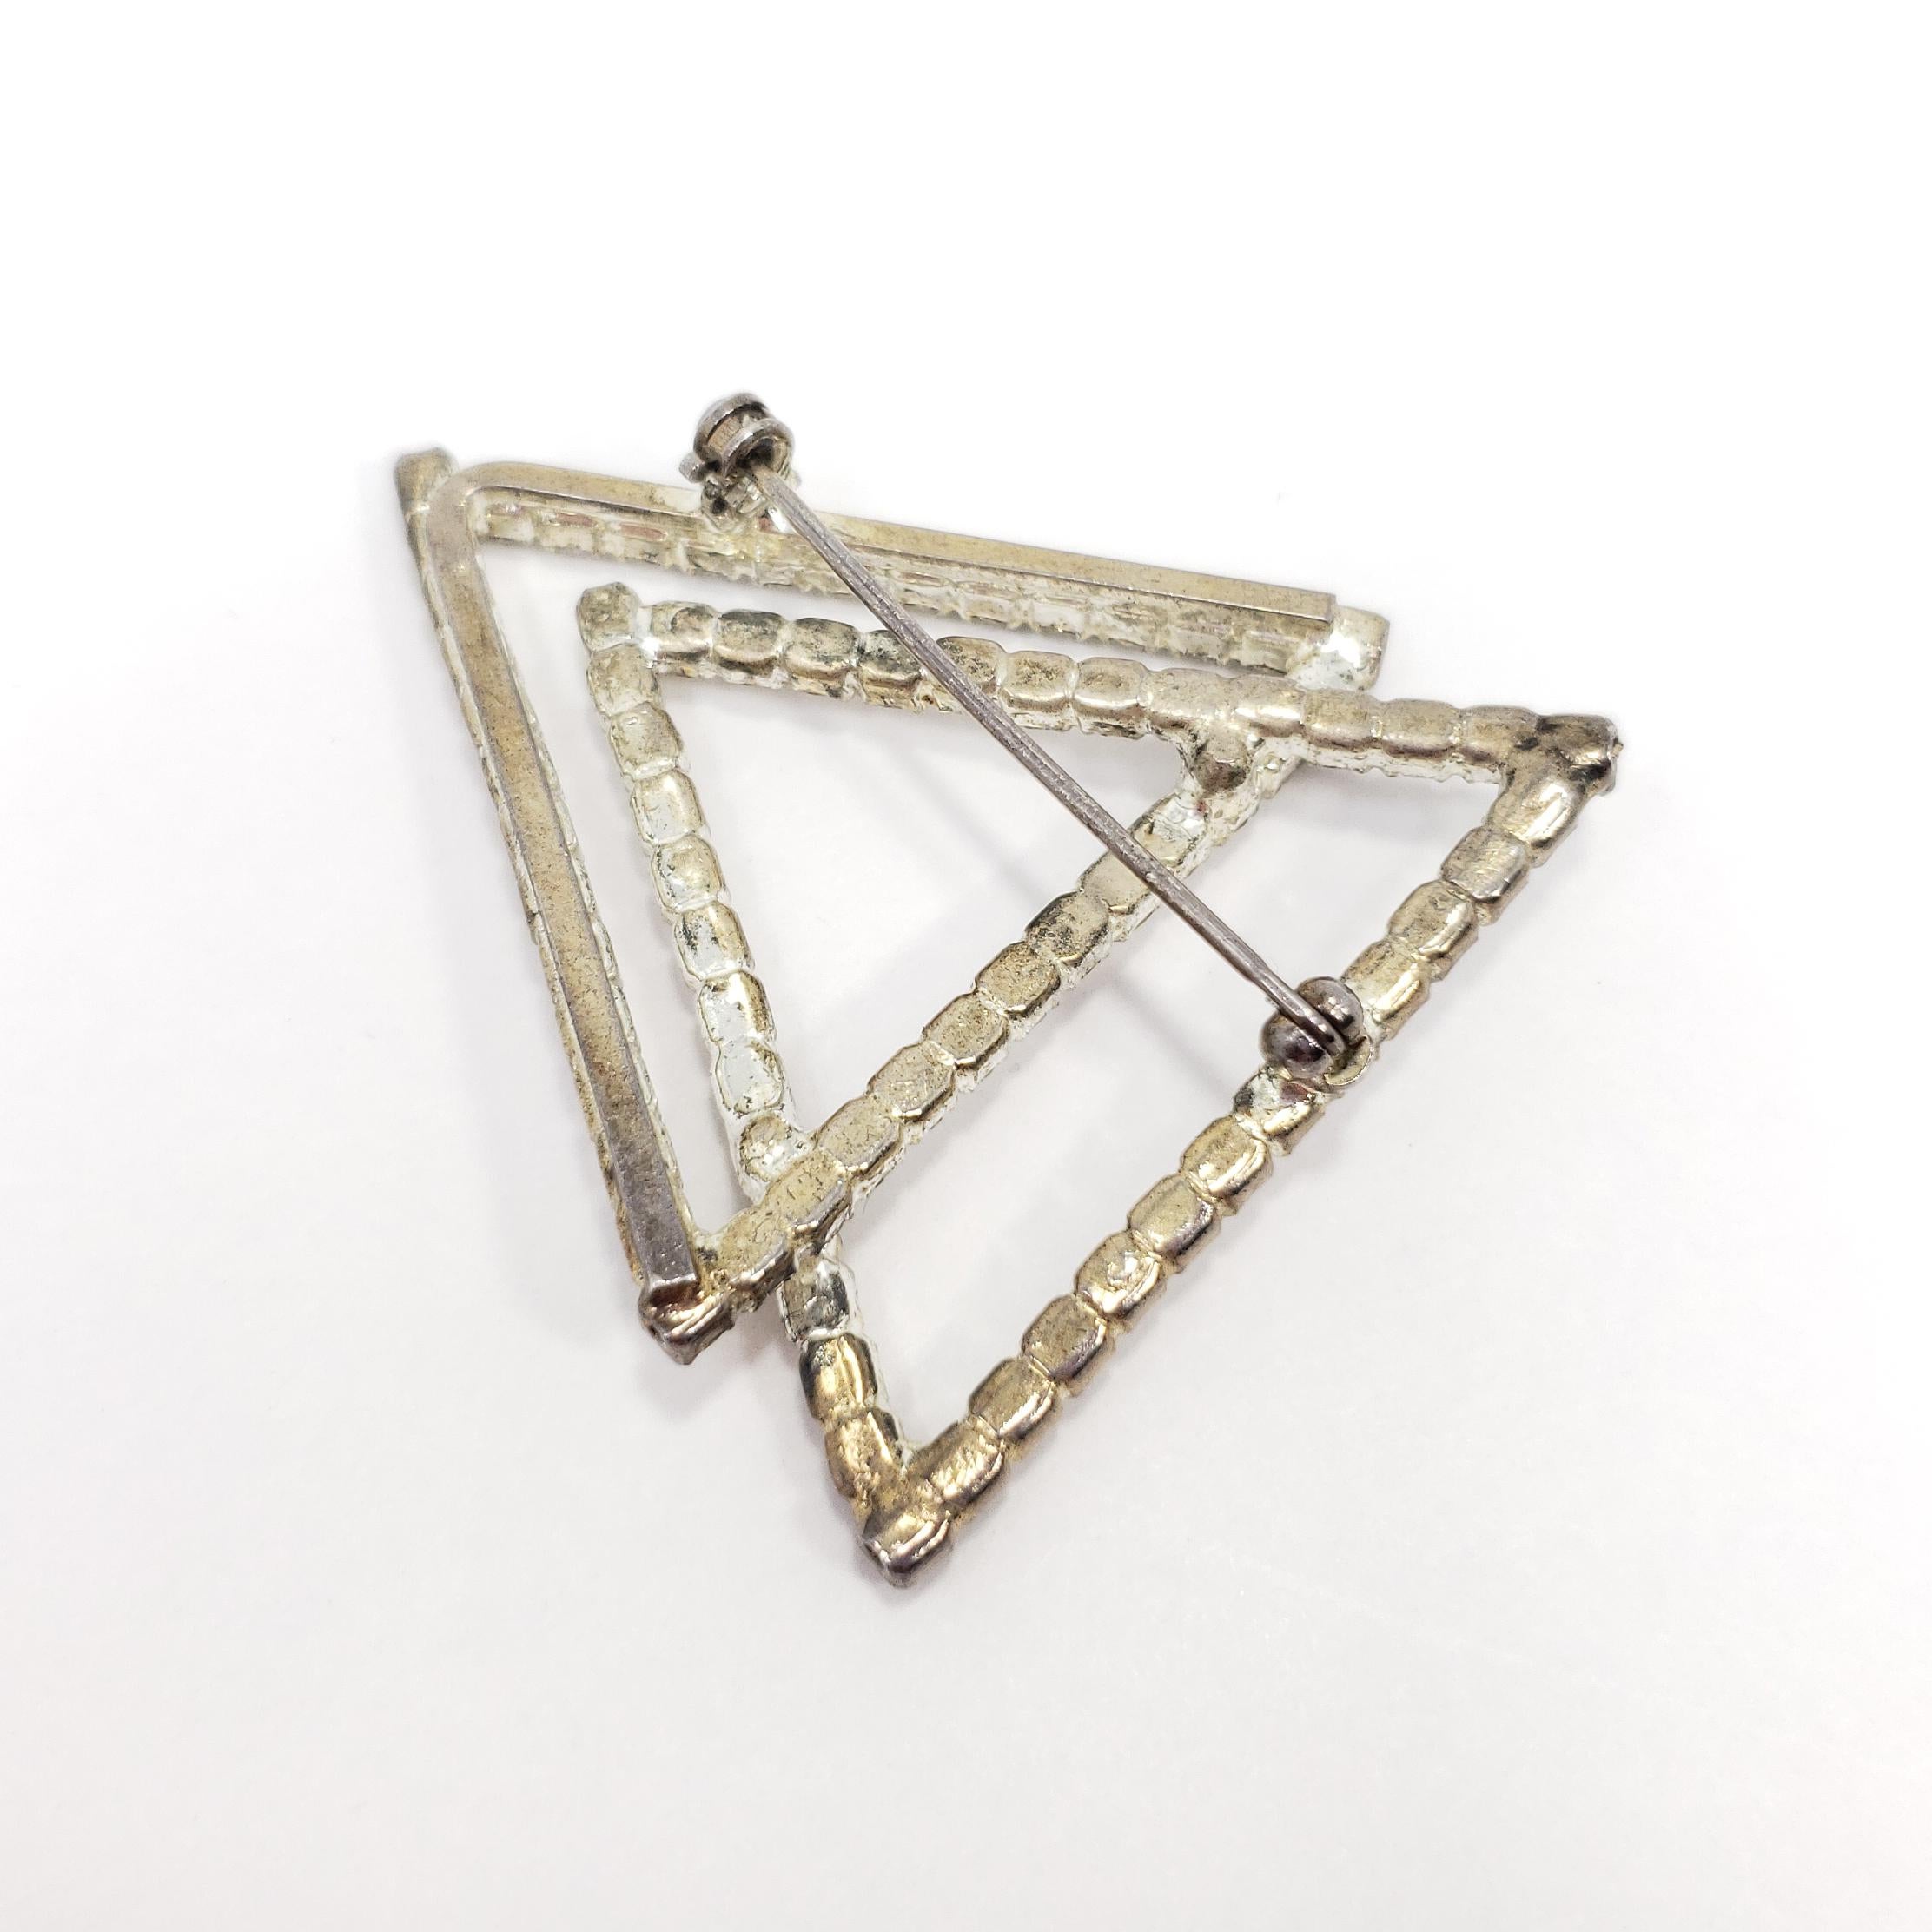 This delightful Art Deco brooch features to interlocked triangles, with sparkling clear crystals. Set in a silver-tone setting.